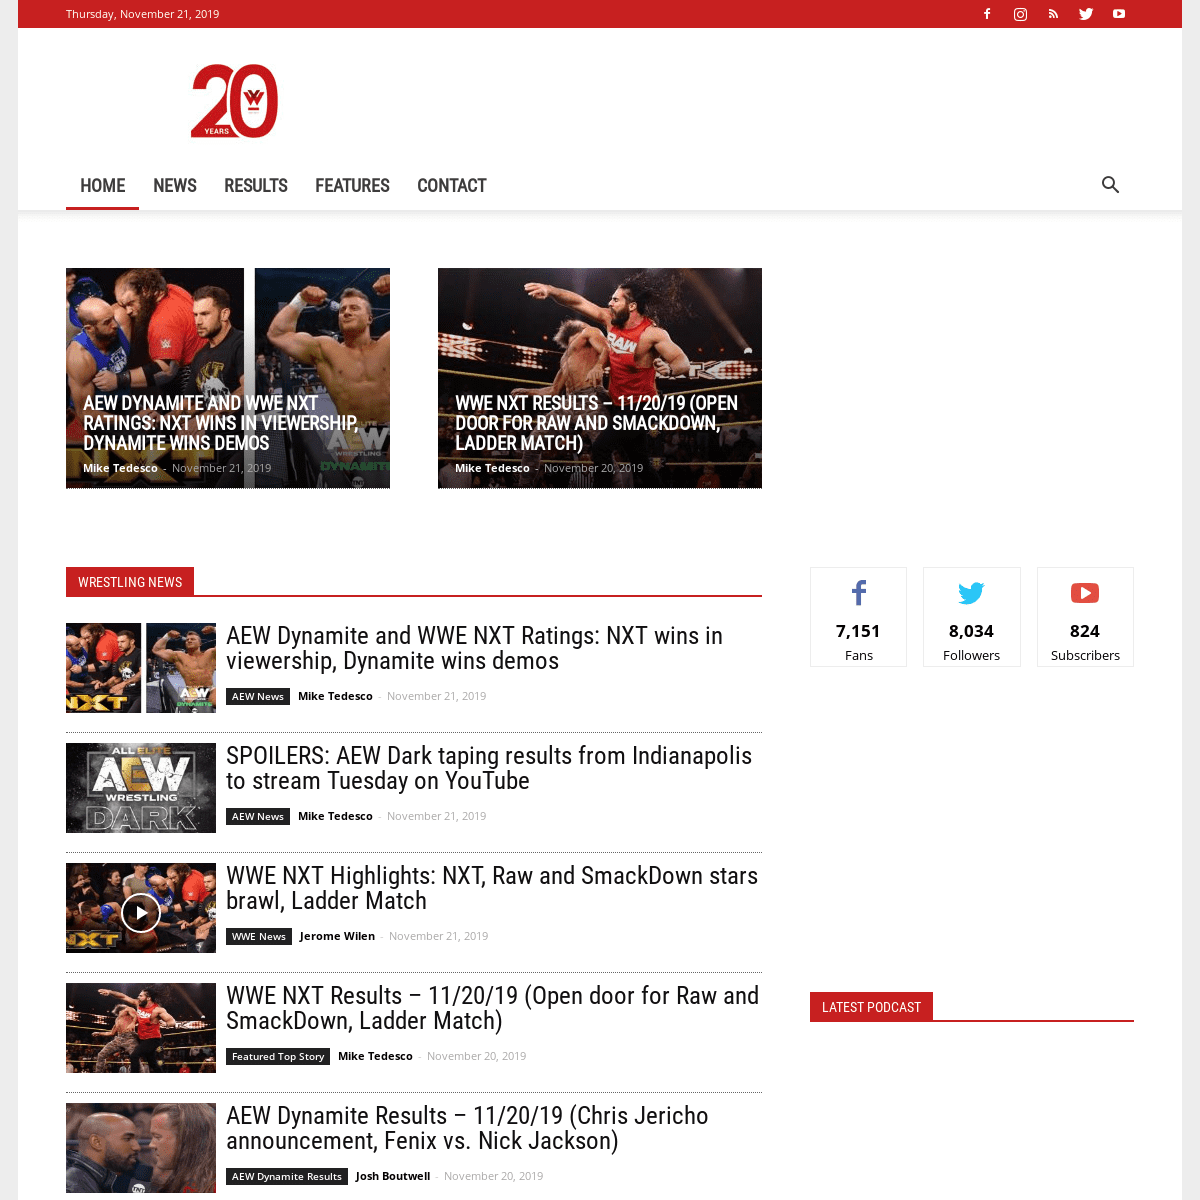 A complete backup of wrestleview.com